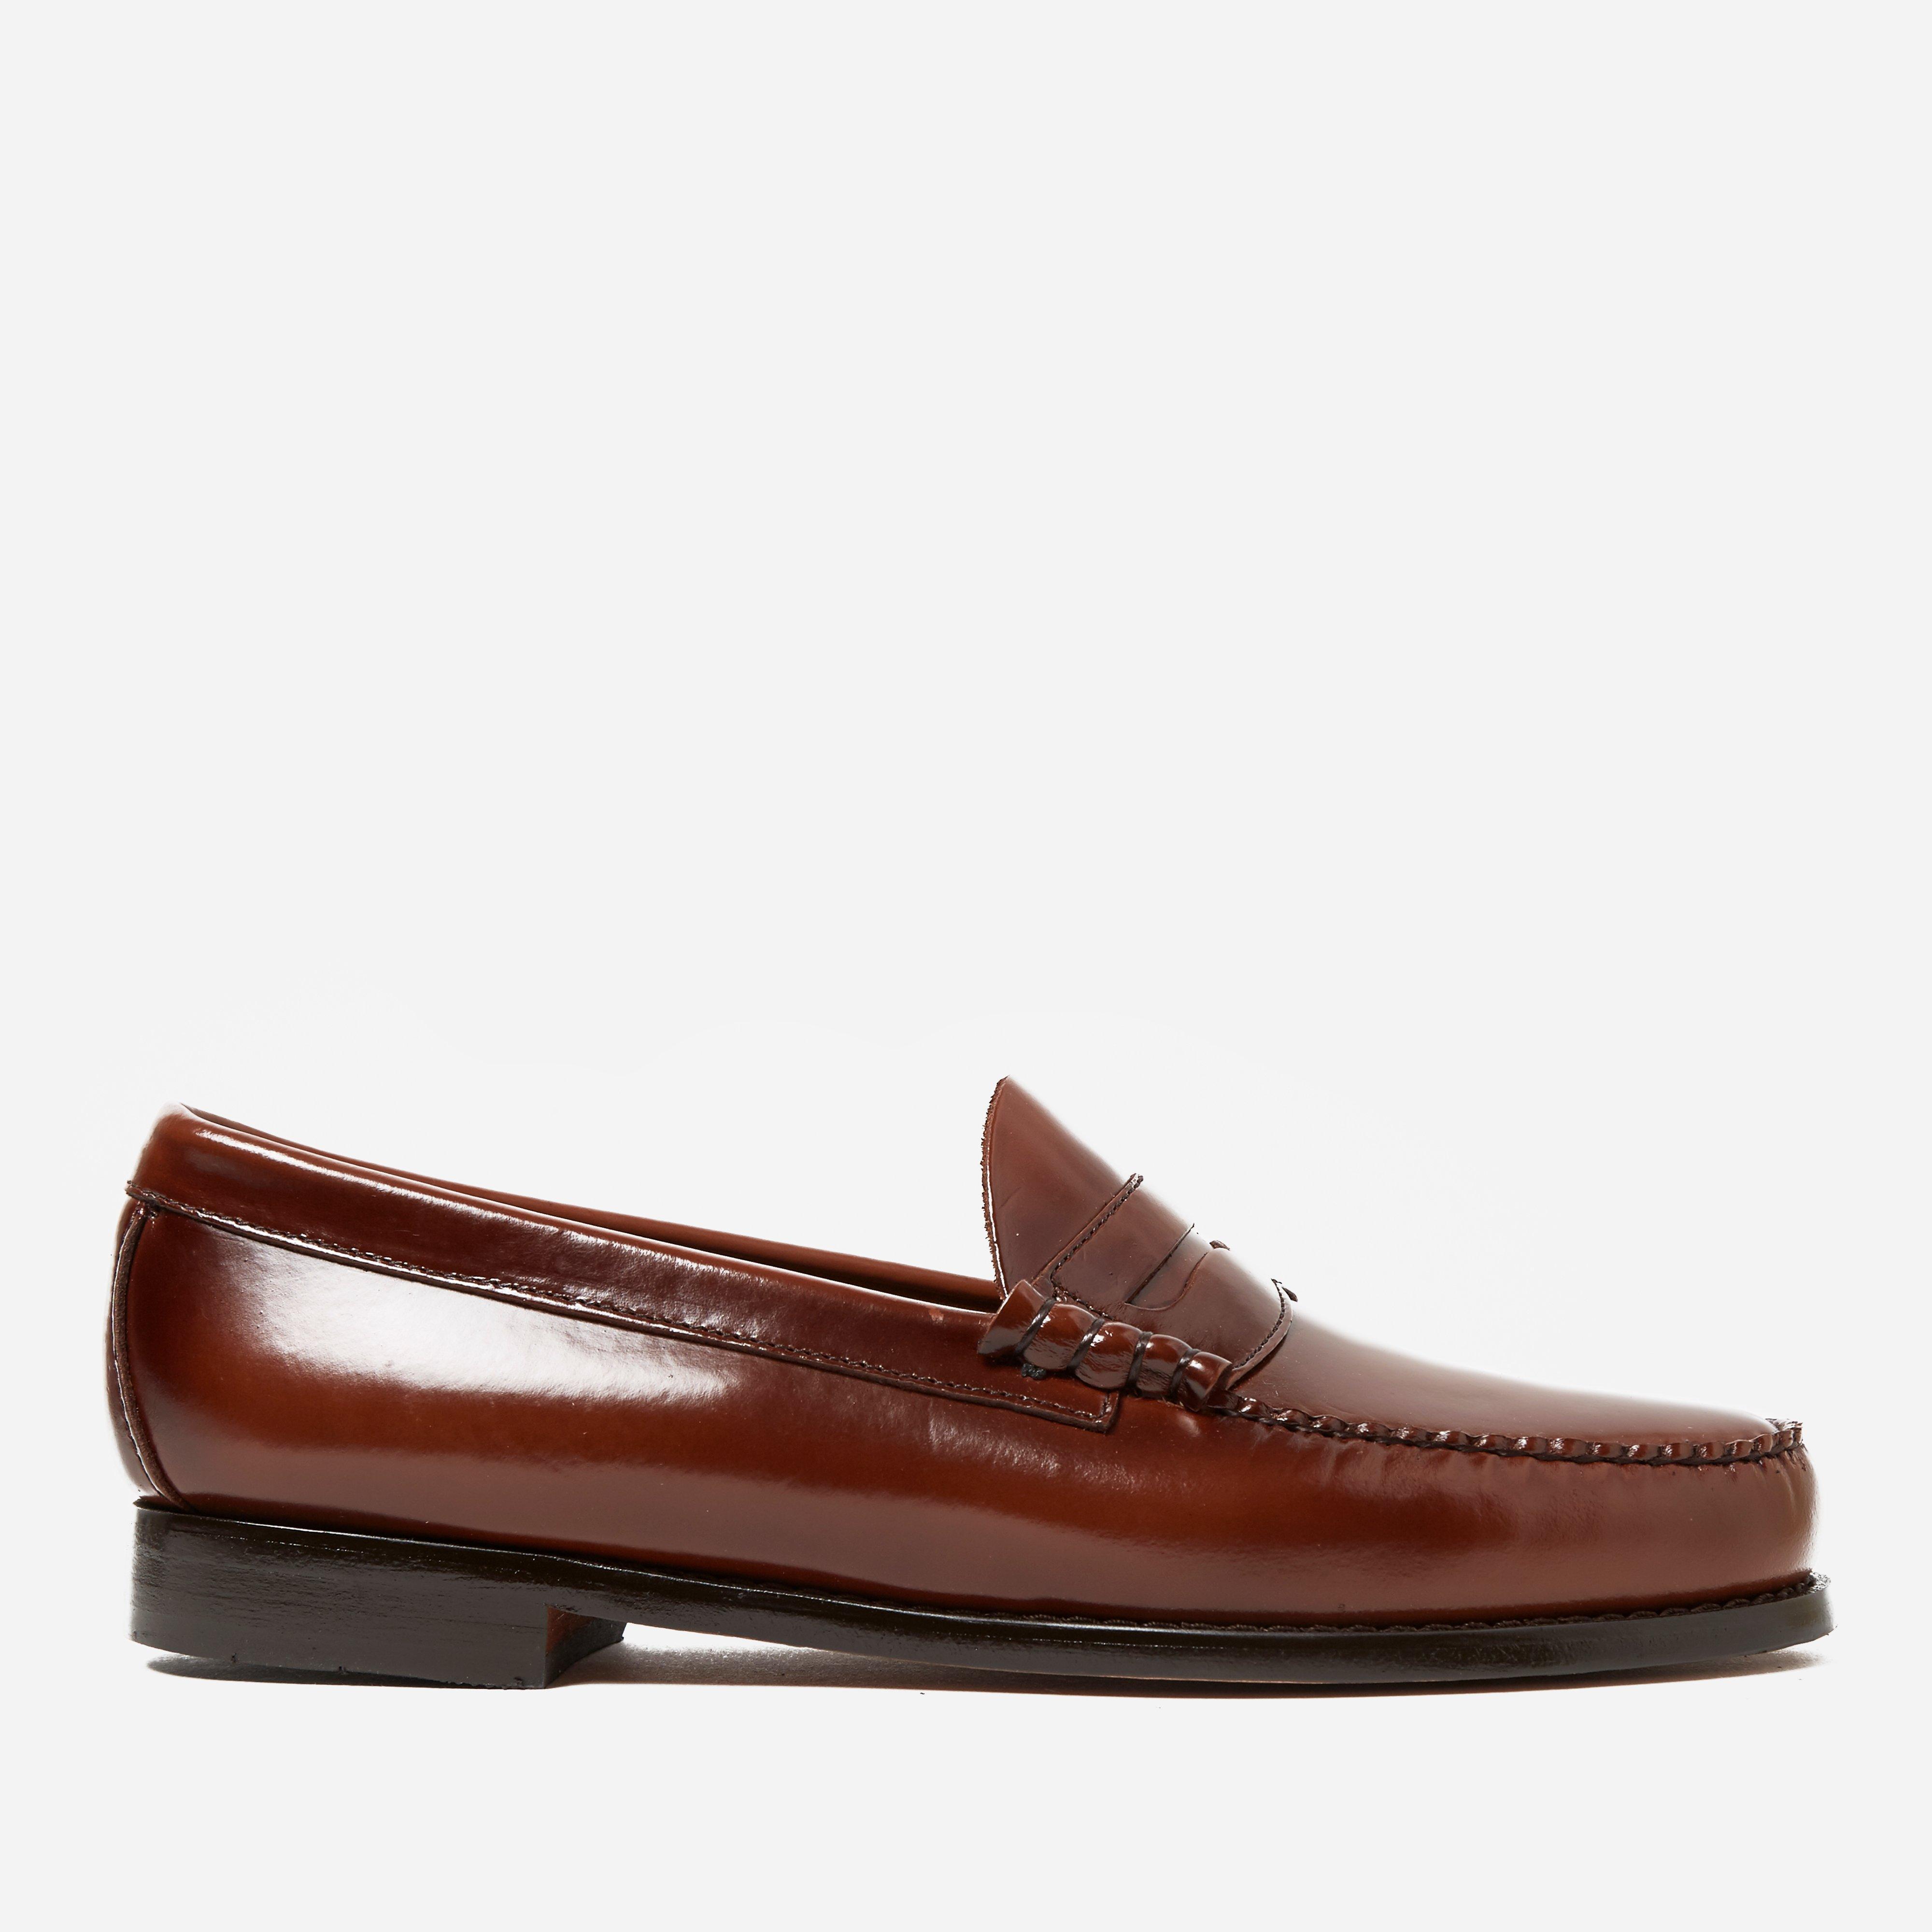 Lyst - G.H.Bass Bass Weejun Larson Penny Loafer in Brown for Men